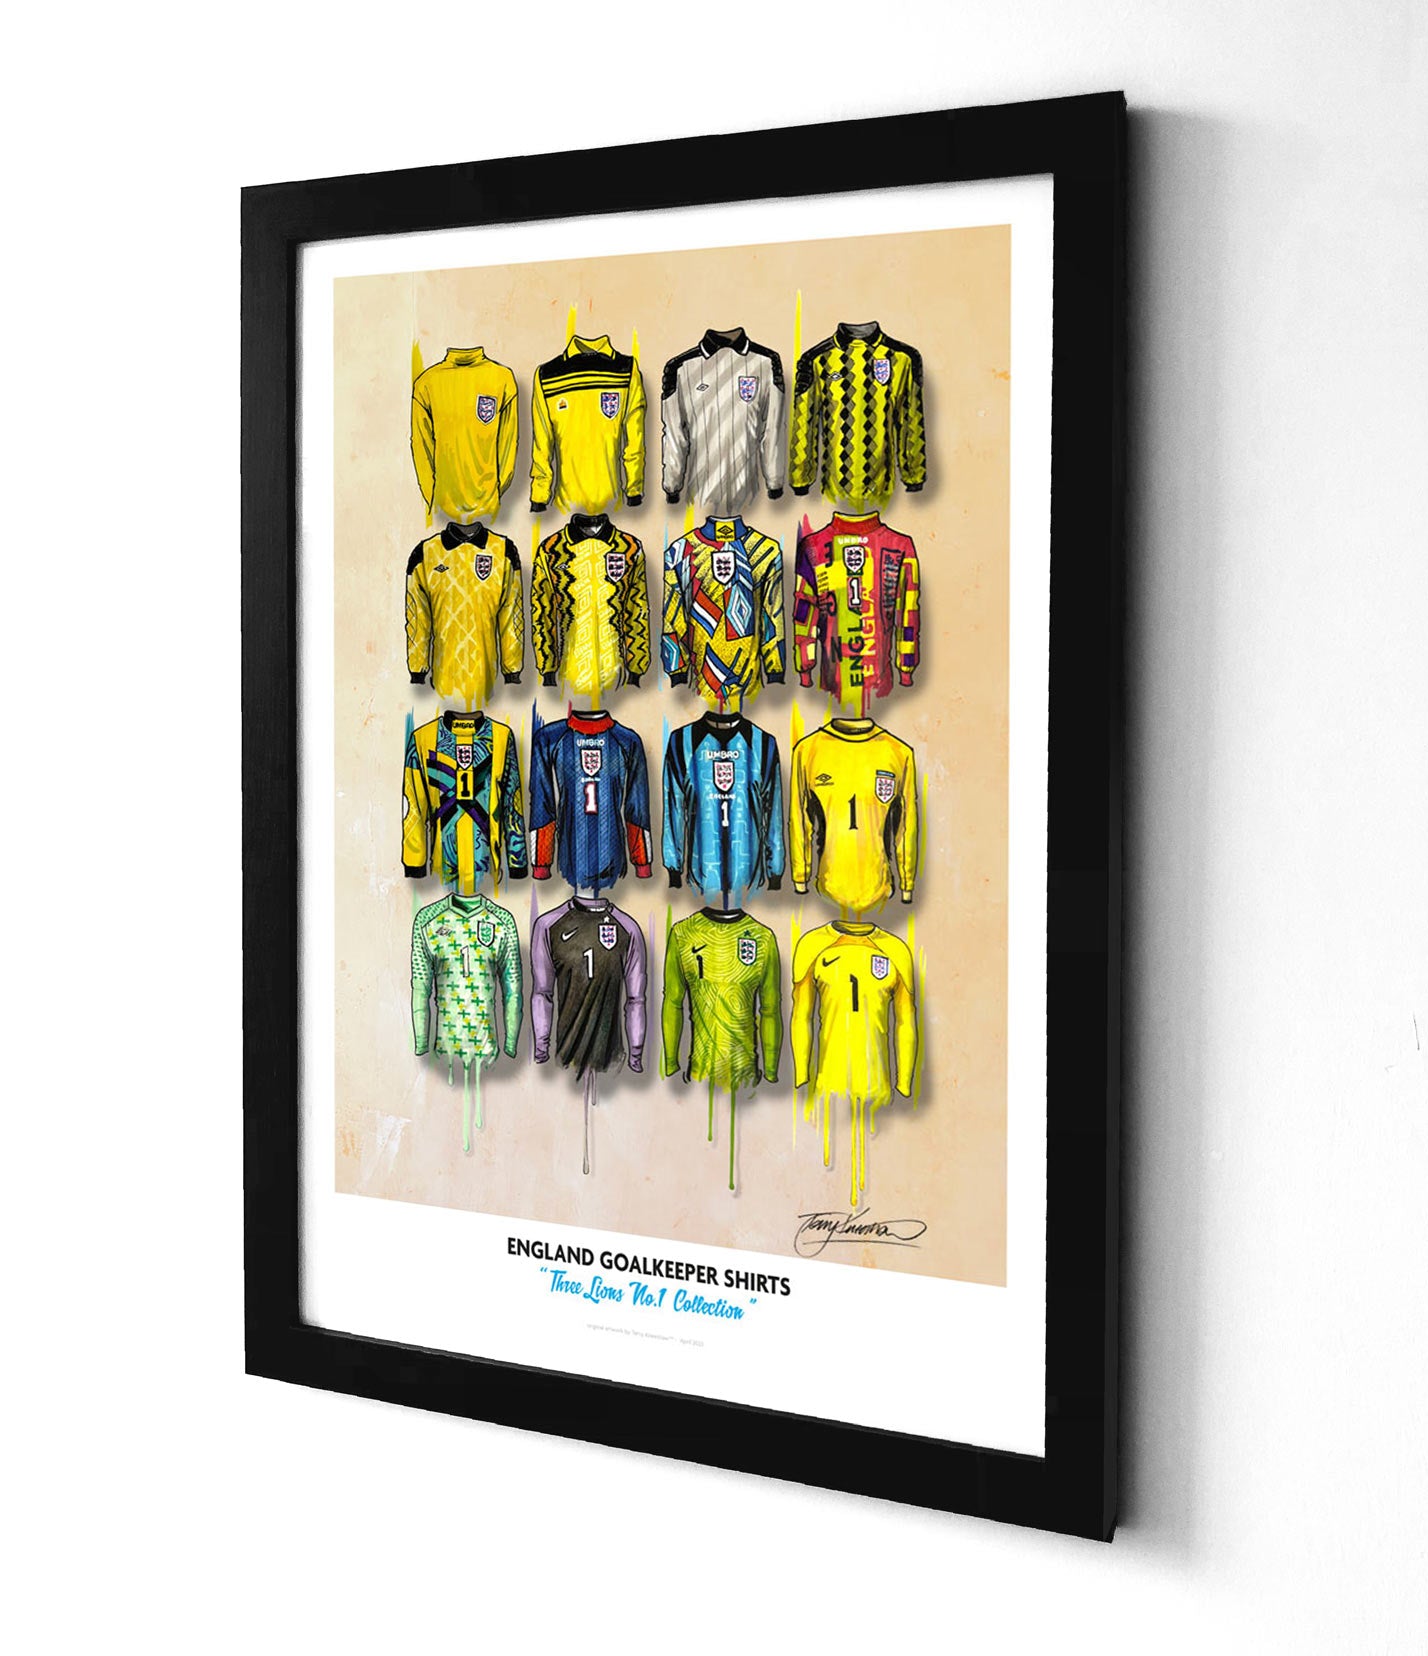 These limited edition A2 prints by Terry Kneeshaw showcase his artwork featuring 16 different England Football Club GoalKeeper jerseys throughout the years. 